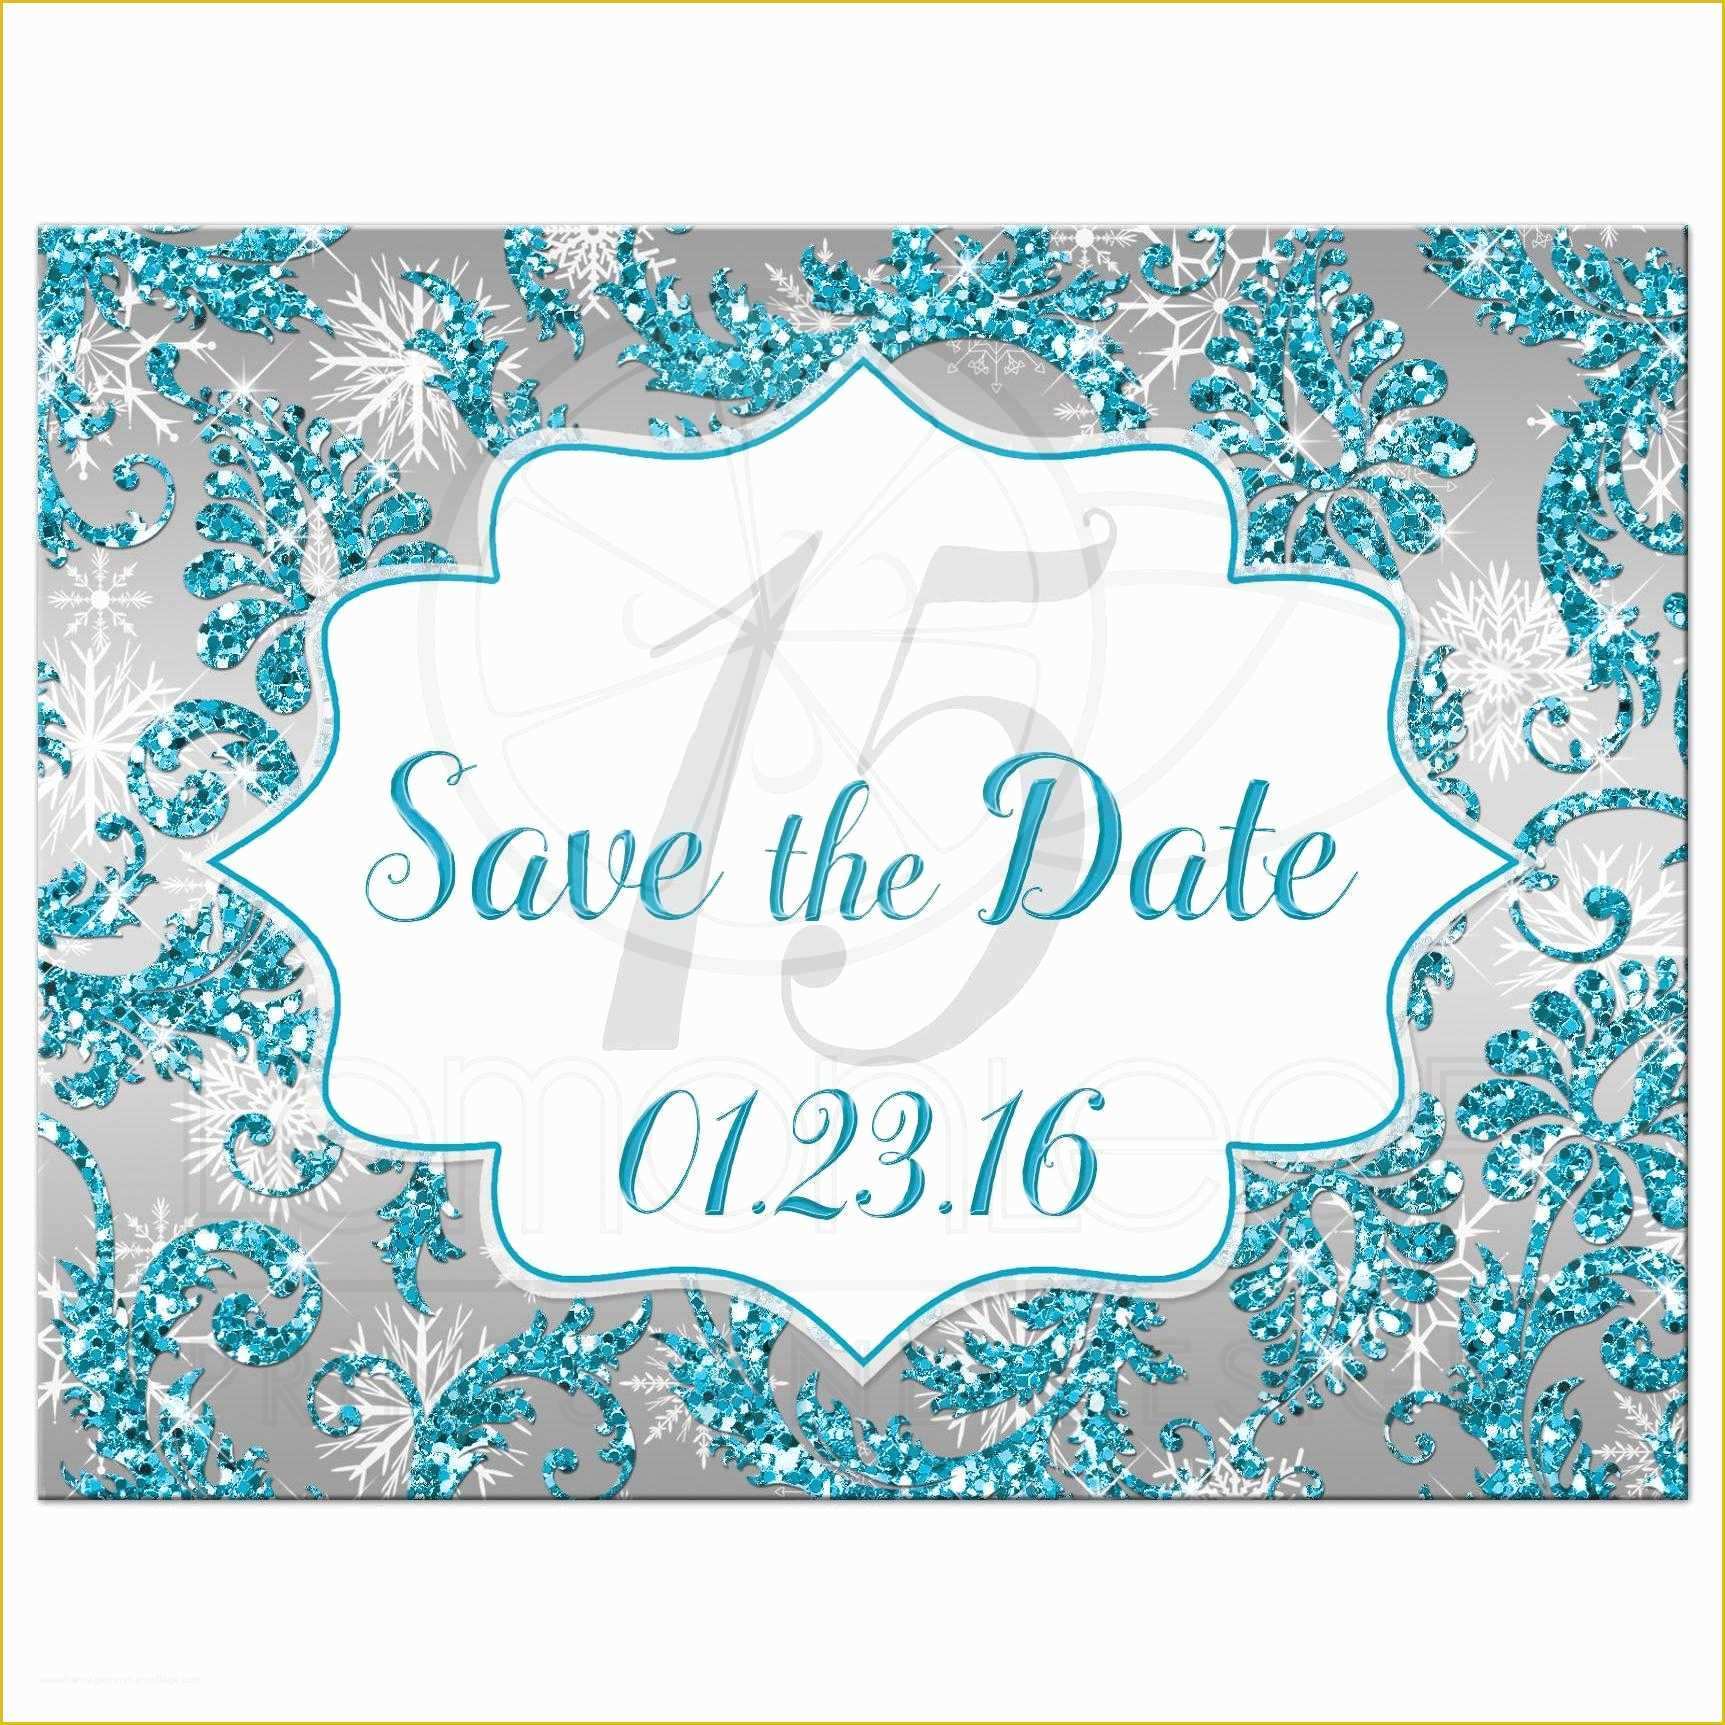 Free Quinceanera Save the Date Templates Of Quinceañera Save the Date Card